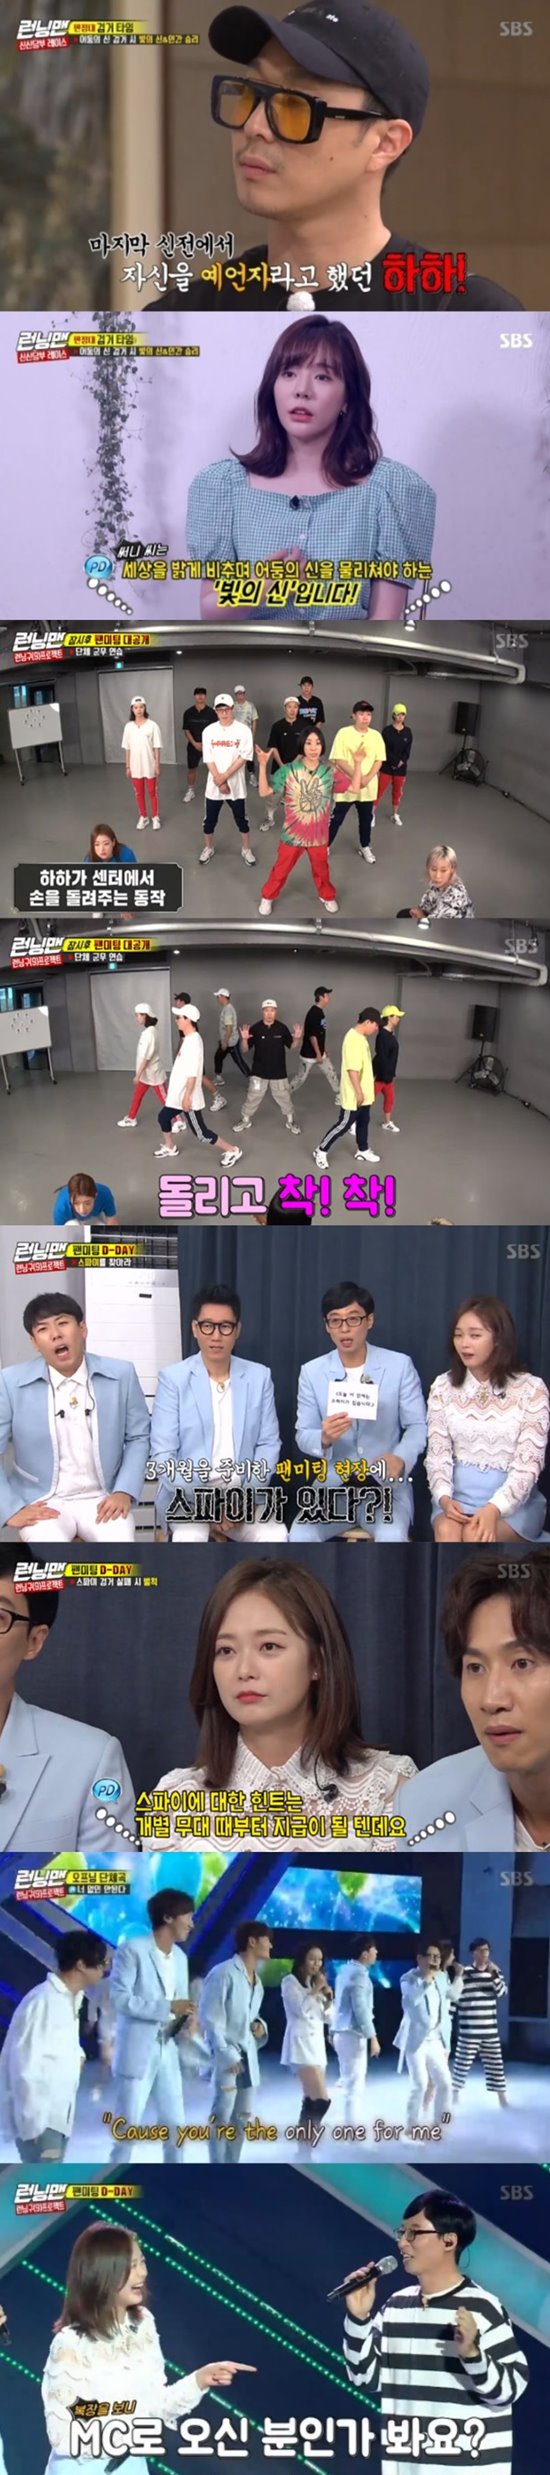 Running Man made its first public release of The long-awaiteds 9th anniversary fan meeting T-Shirt, soaring to 7.8% of the highest TV viewer ratings per minute, ranking first in the same time zone of 2049 Target TV viewer ratings.According to Nielsen Korea, a TV viewer rating research institute, SBS Running Man, which was broadcast on the 8th, recorded 3.2% (based on the second part of the TV viewer ratings of the metropolitan area) which is an important indicator of major advertising officials, which is higher than last week, surpassing the Masked Wang and the Donkey Ears to the Head of the Masked Man. He kept the top spot.The final results of the race of the couple, Shin Shin-dang, following last week, were released on the show.Girls Generation Sunny, singer Stern, actor Kim Yewon, and Jang Yewon announcer appeared and a psychological exhibition of light god, dark god, human beings was held.The members realized that the god of darkness could be a prophet during the reasoning, and raised Haha as the god of darkness in the final judgment.Haha was the god of darkness, Sunny was the god of light, and the god of light and human team won.In addition, the first domestic fan meeting T-Shirt in Running Mans history was also released for the first time on the show.The members sweated to show group dance and couple dance to be presented at fan meetings, and they felt a great burden.Eventually, the day came, and the members greeted 2,500 fans.But for a moment everyone was happy to see the crew released a mission to find Spy. The members were embarrassed to say that they had to find Spy as well as stage performances.Audiences were aware of Spys Identity, and the crew said they offer individual hints with the audiences shouts.On the other hand, the opening of T-Shirt was decorated Running Man.Through the opening mission, Yo Jae-Sukman appeared on stage wearing prison uniforms, and the rest of the members dressed up in wonderful opening costumes and performed the opening performance of No You.The scene was the best TV viewer ratings per minute with 7.8%.Fans were greeted with enthusiastic cheers, and Ji Suk-jin announced the start of T-Shirt with a unique official slogan called Race Start.Photo = SBS Broadcasting Screen